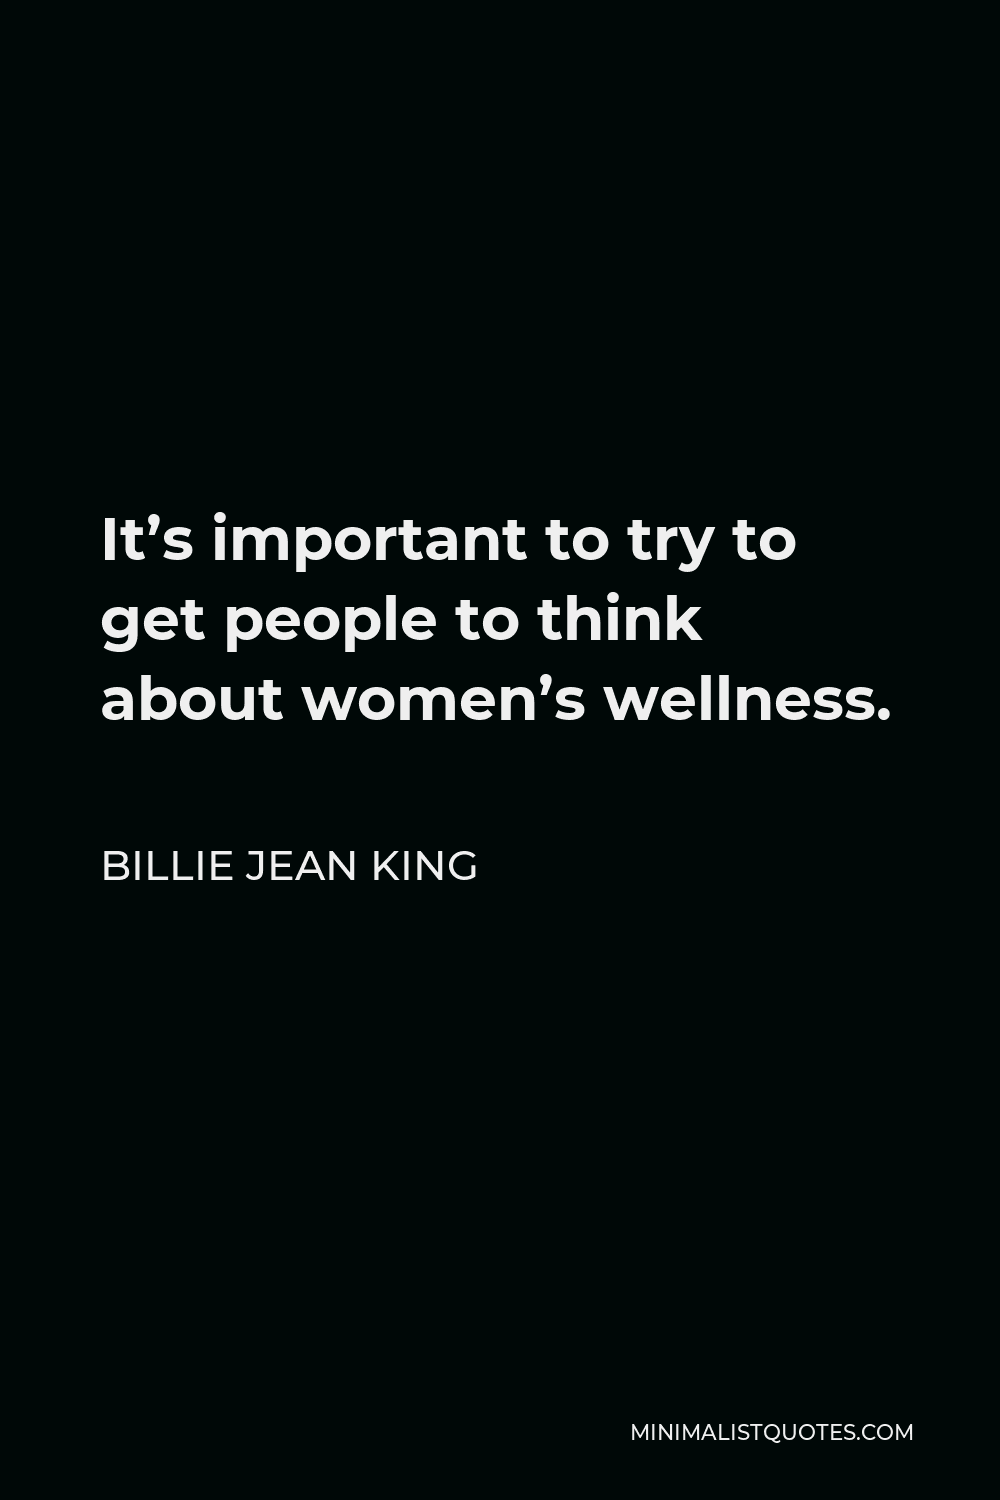 Billie Jean King Quote - It’s important to try to get people to think about women’s wellness.